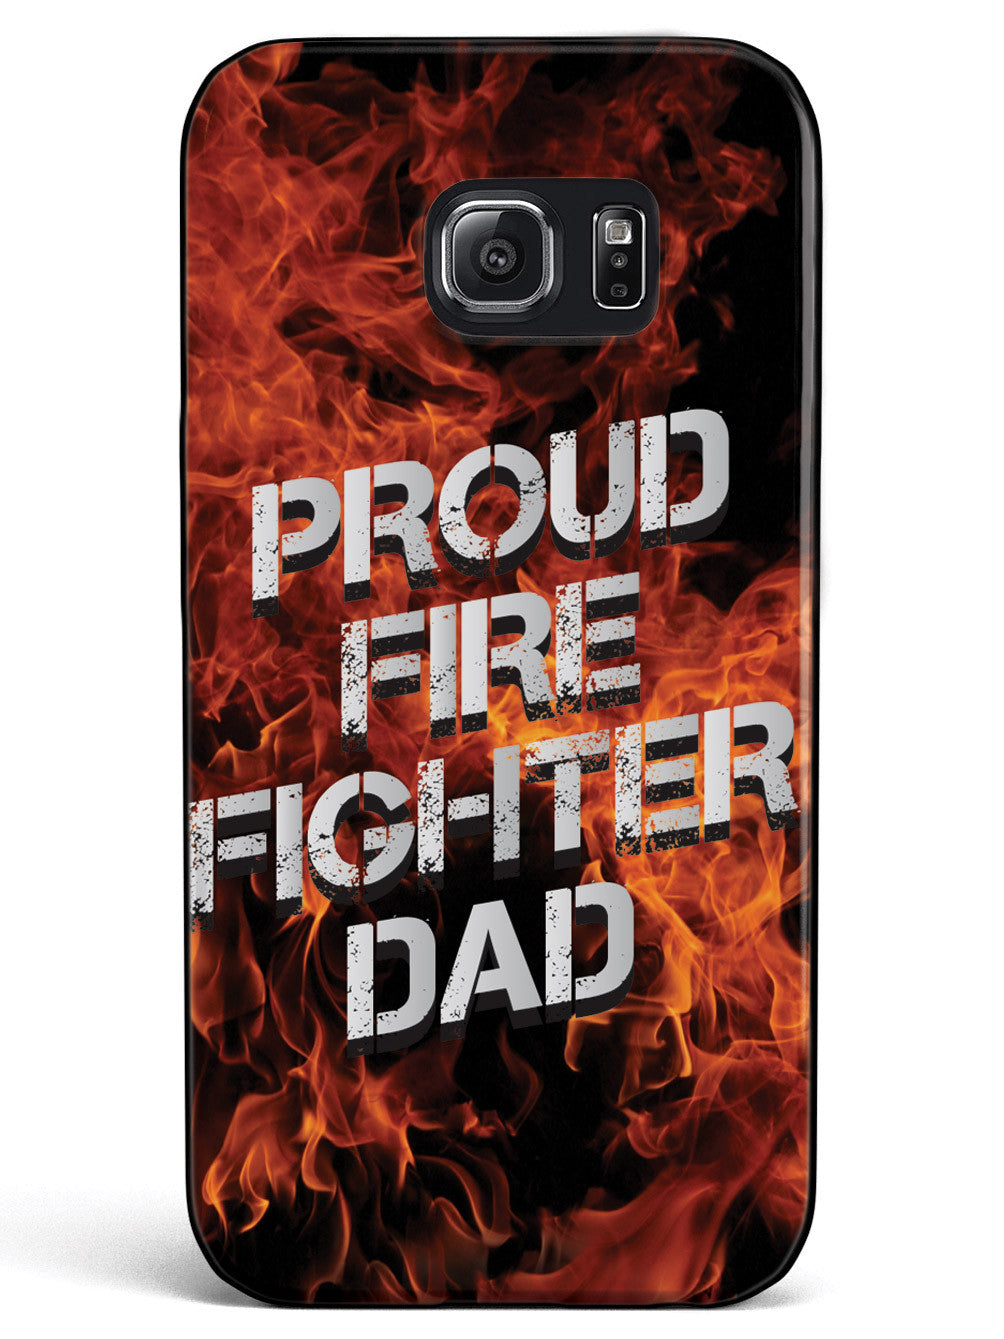 Proud Firefighter Dad - Flame Case